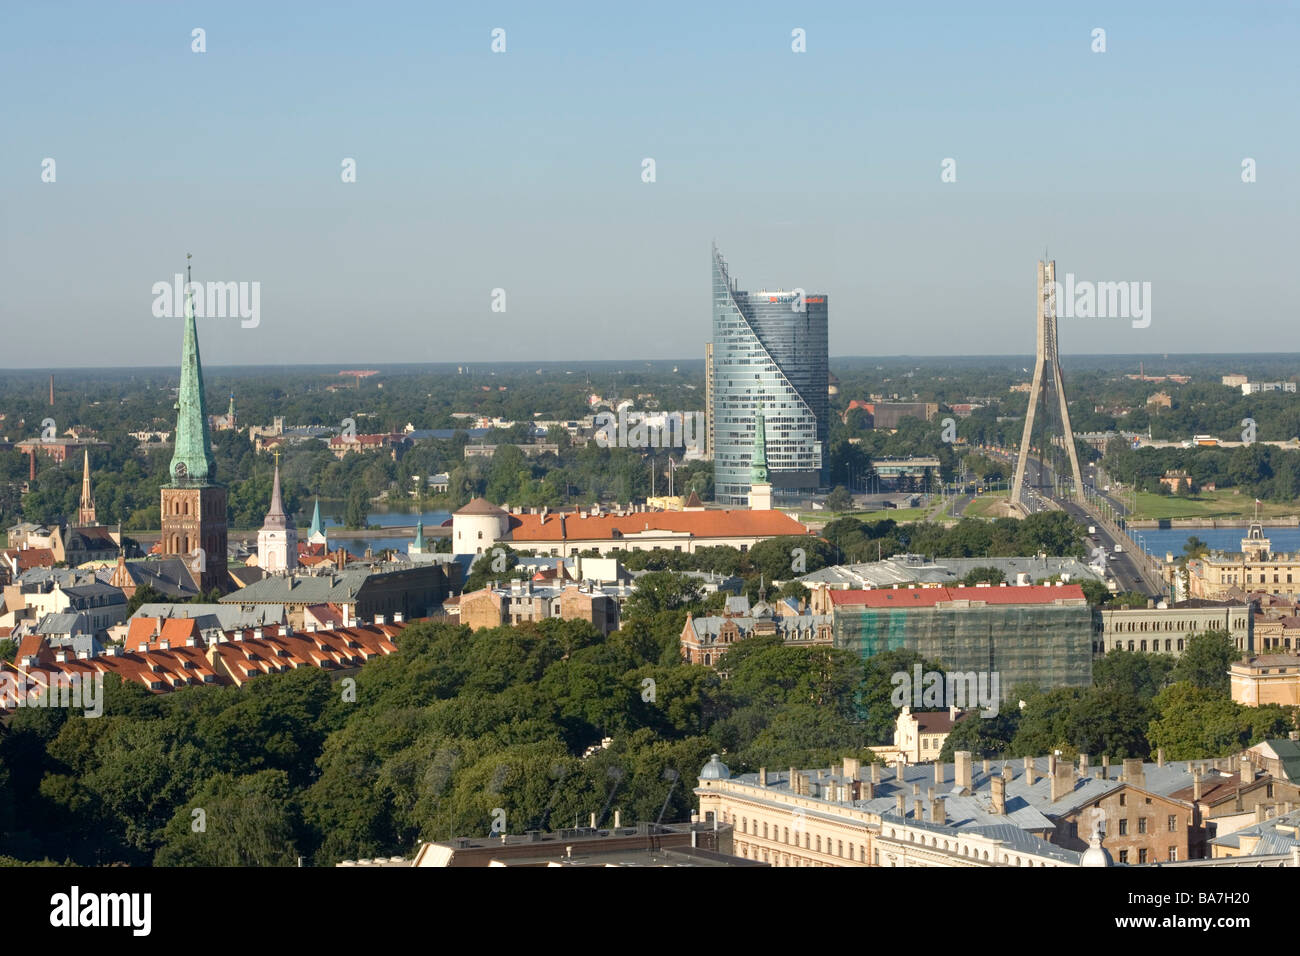 View over the old town center of Riga Stock Photo